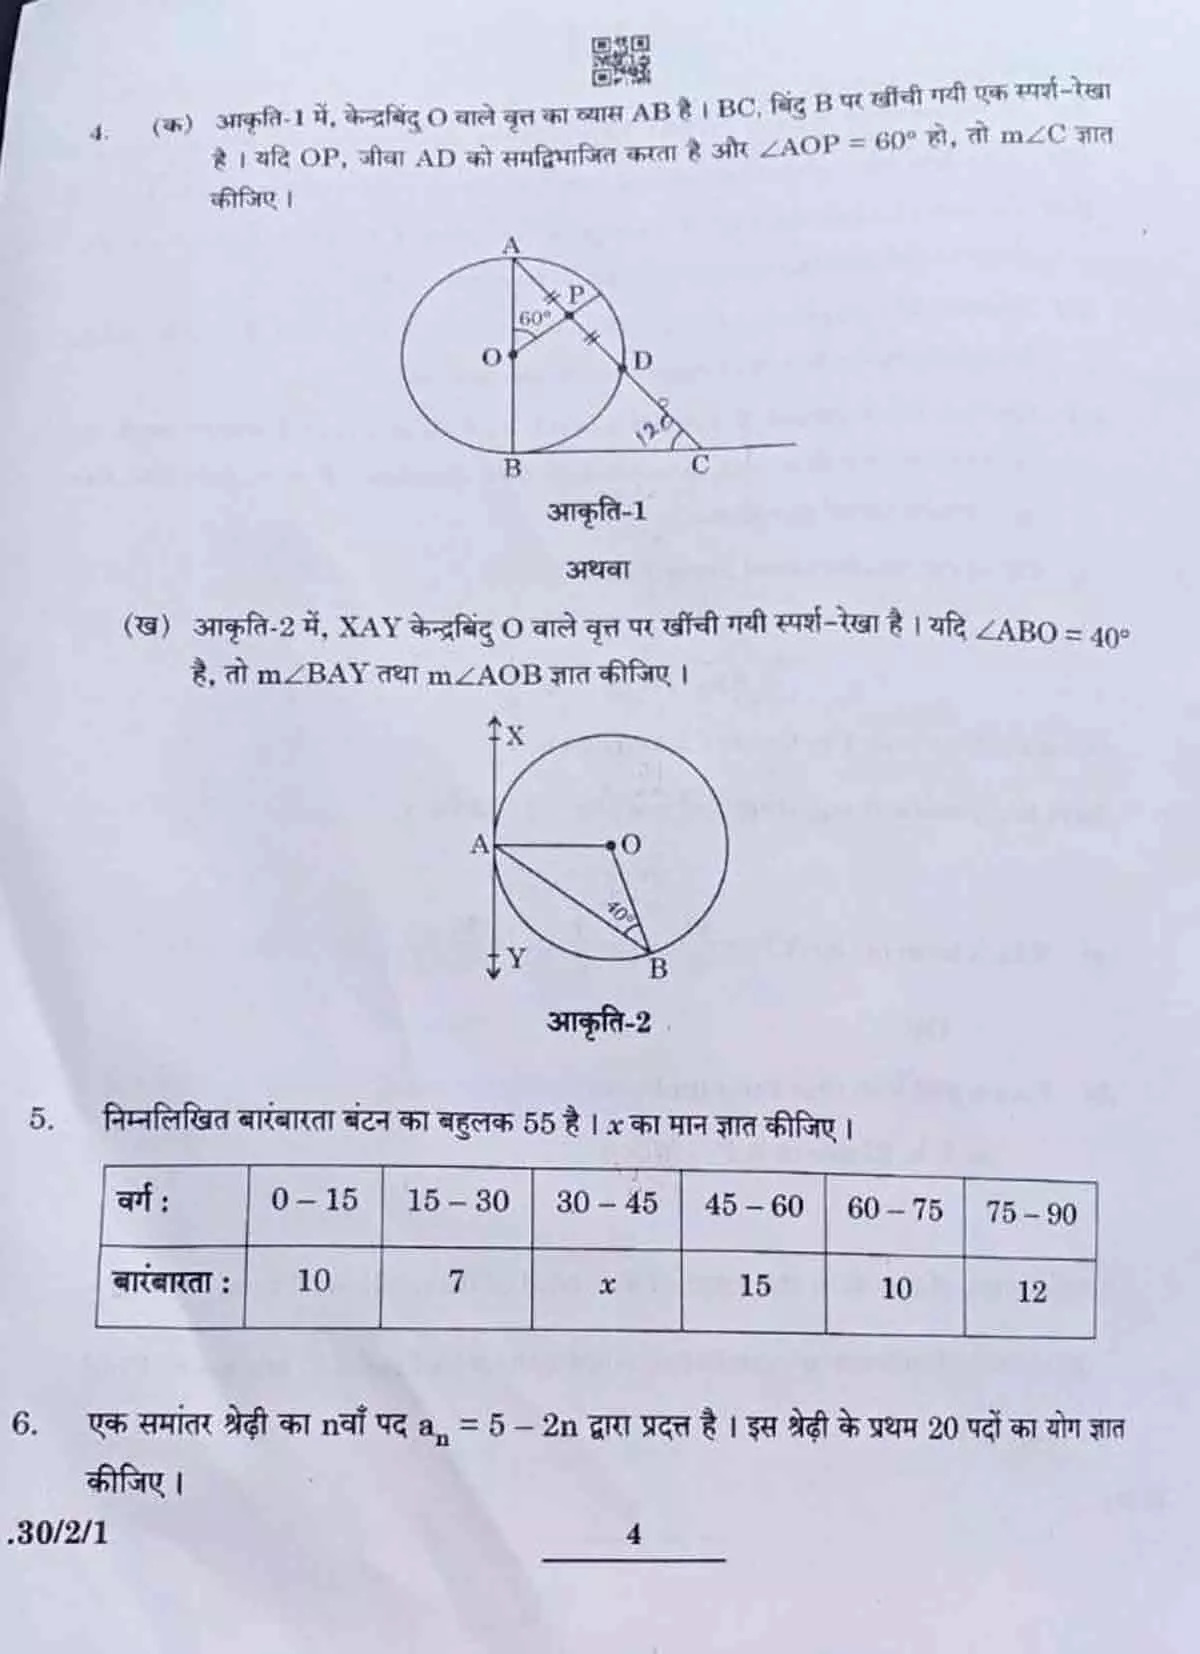 CBSE Class 10th Question Paper Page 4